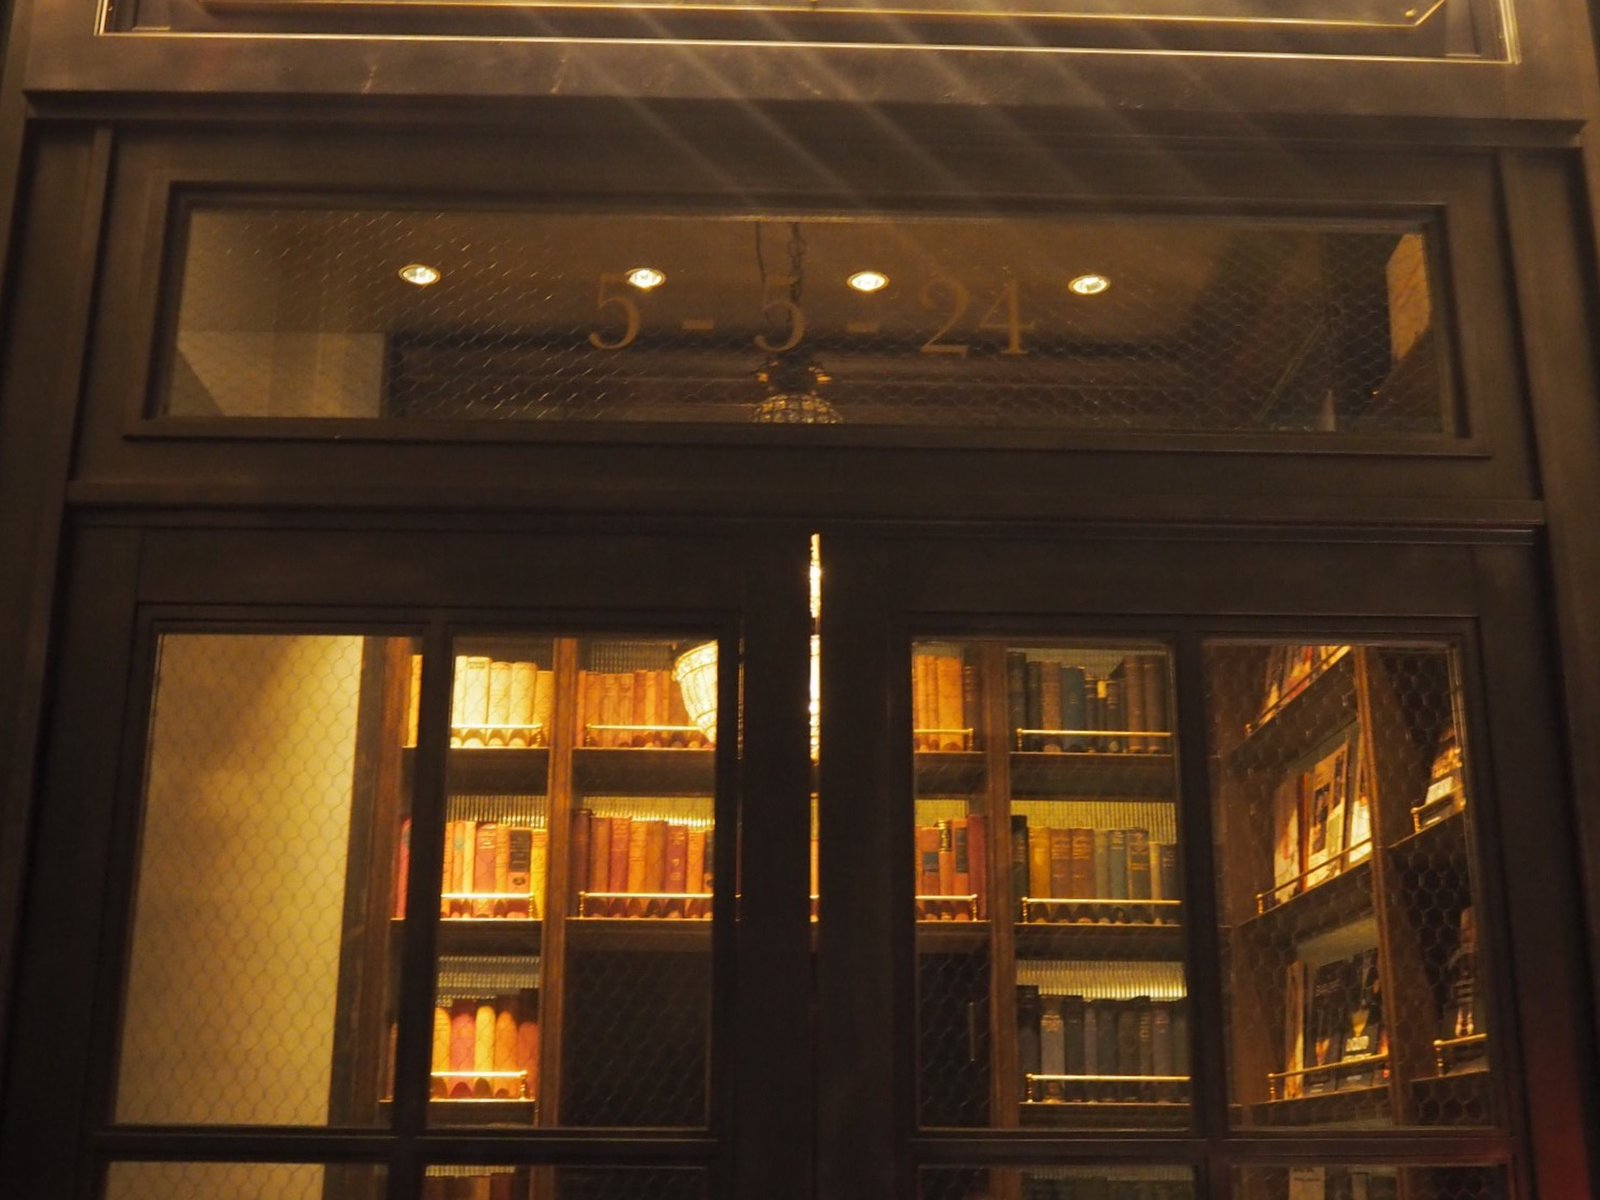  TOKYO Whisky Library